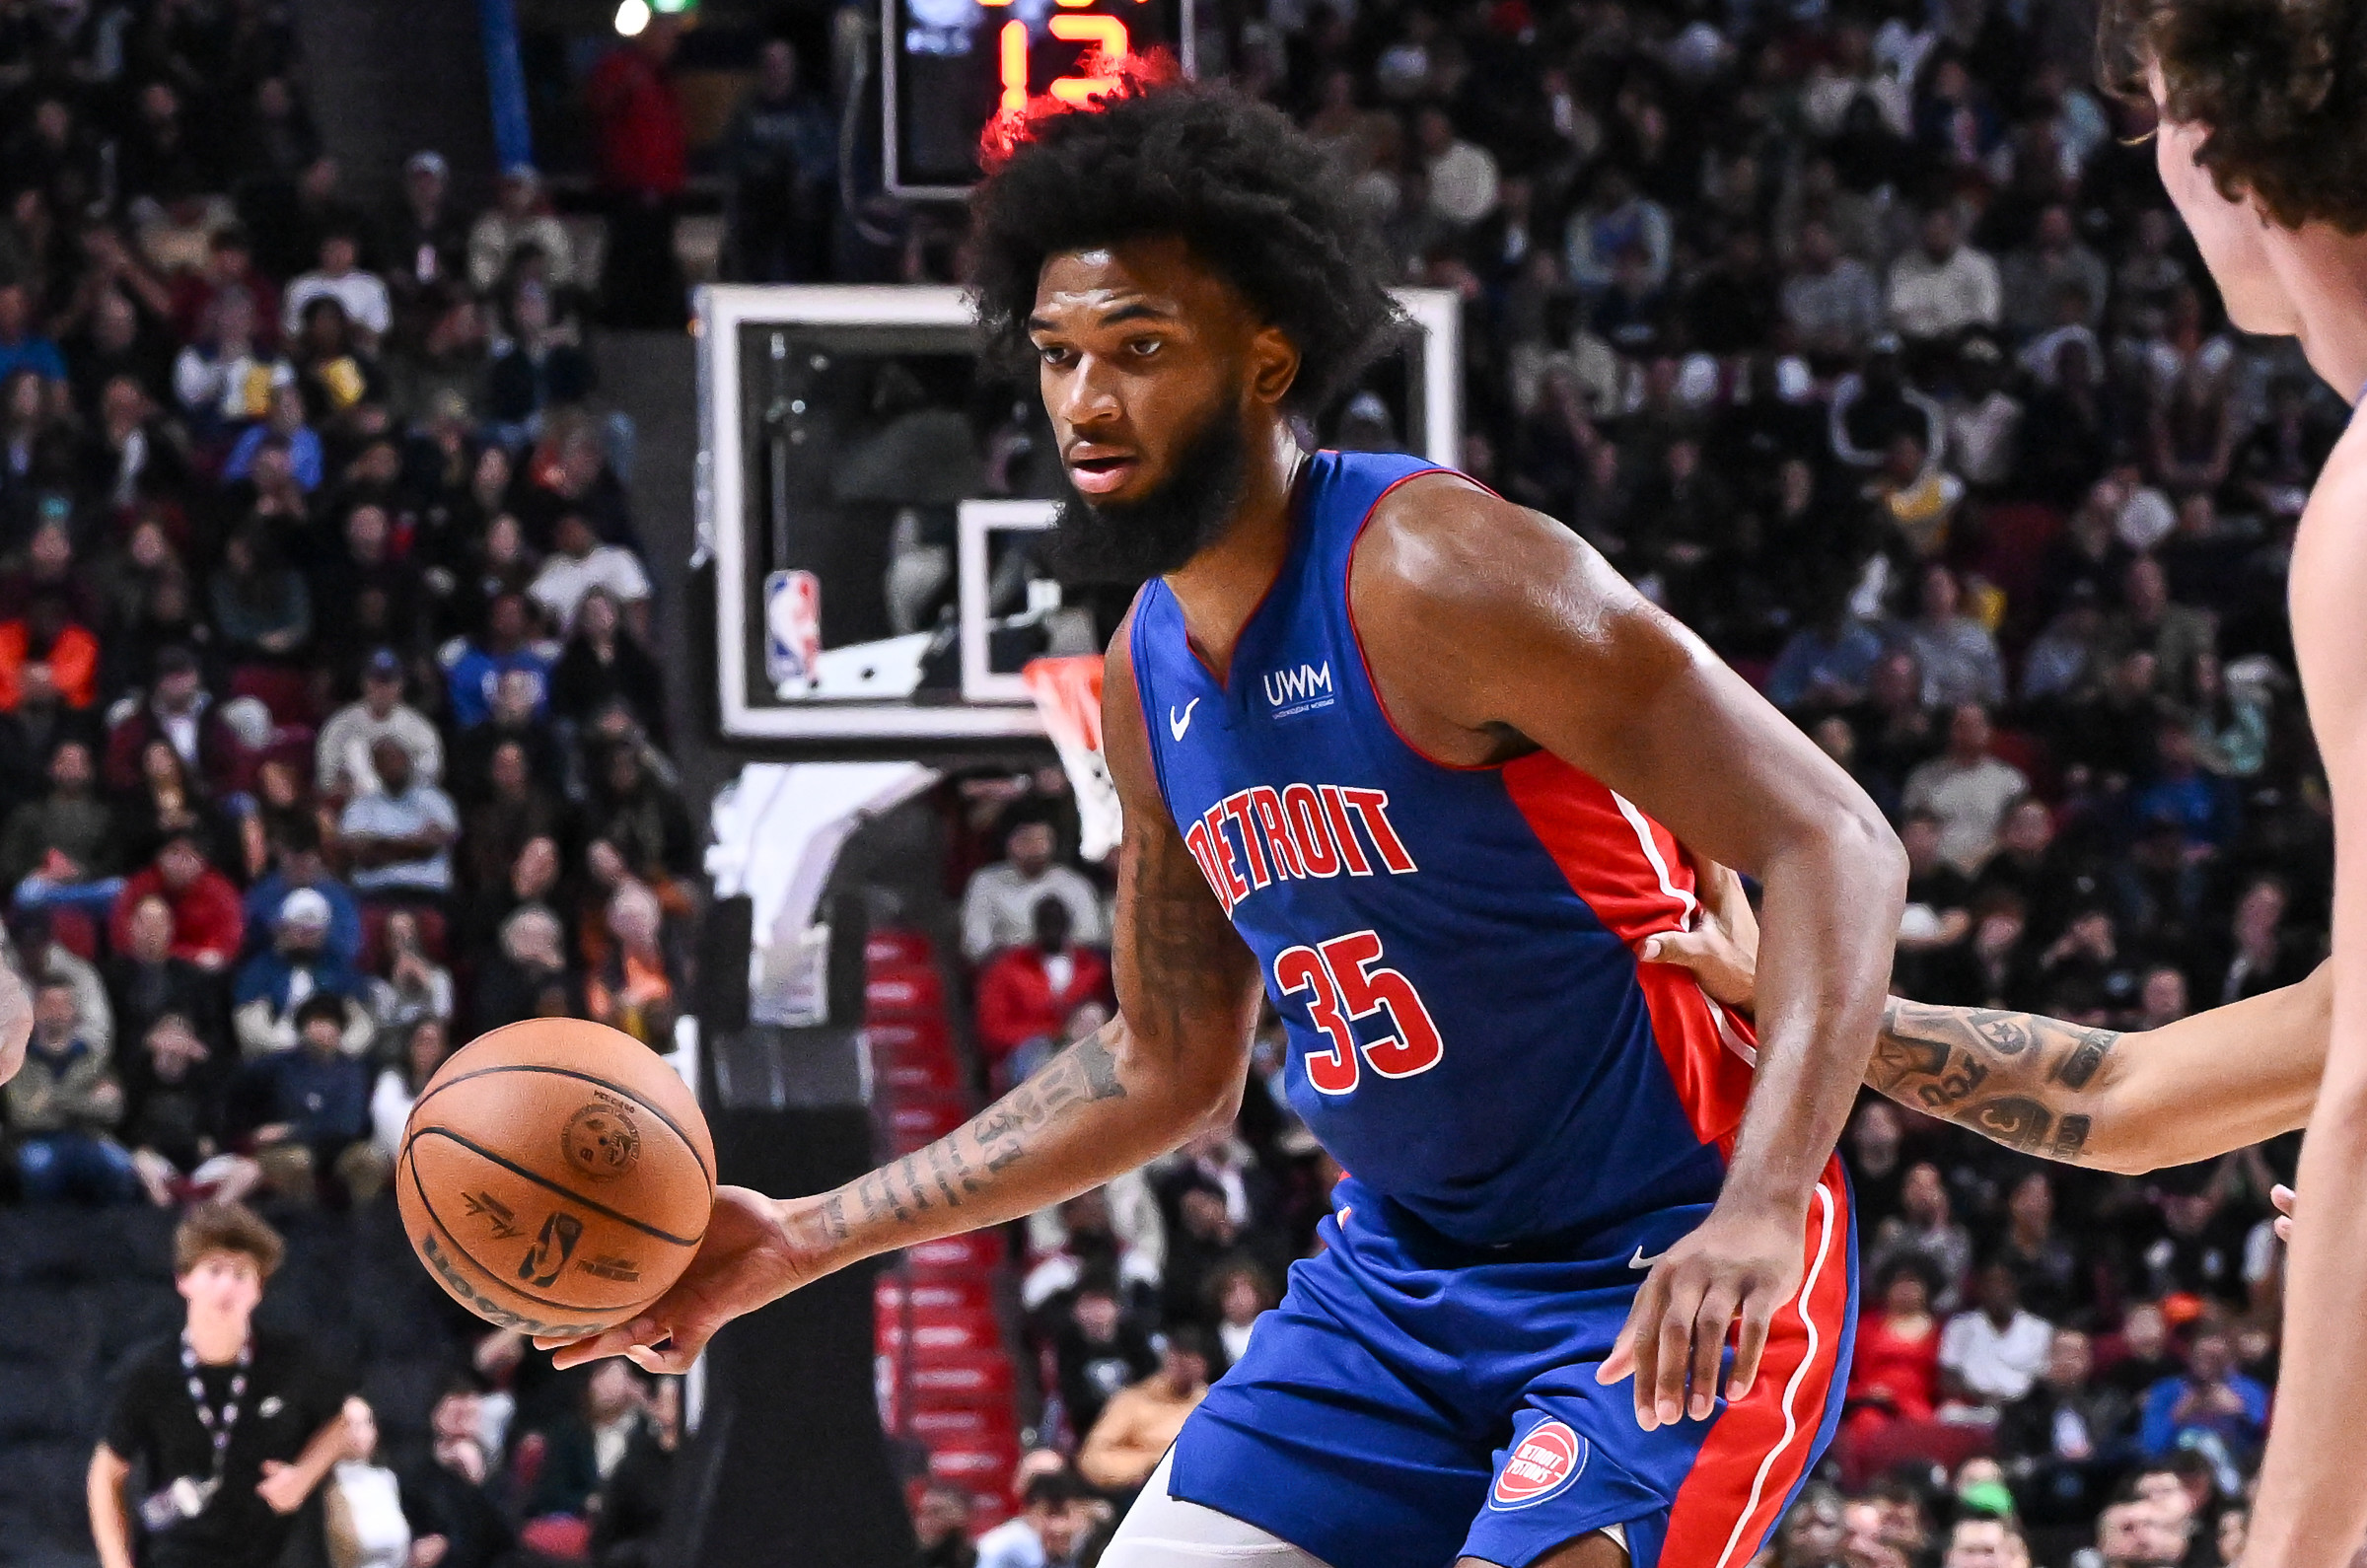 Pistons vs. Hawks preview: It's time to feel the teal - Detroit Bad Boys